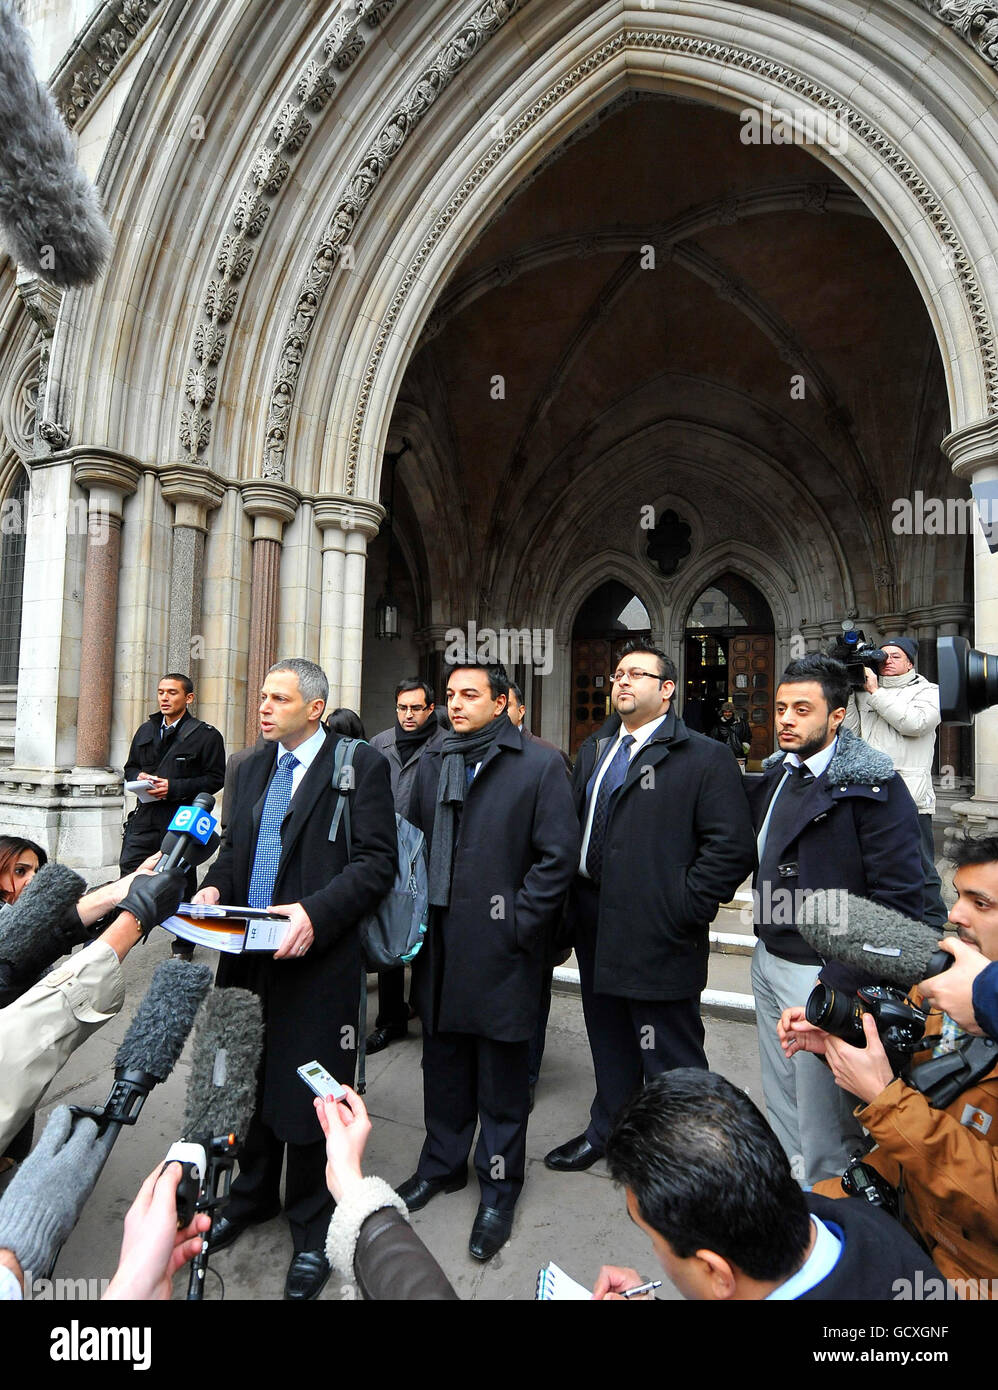 Andrew Katzen, solicitor for the relatives of Shrien Dewani, reads a statement on behalf of the family outside the Royal Courts of Justice, London. Stock Photo